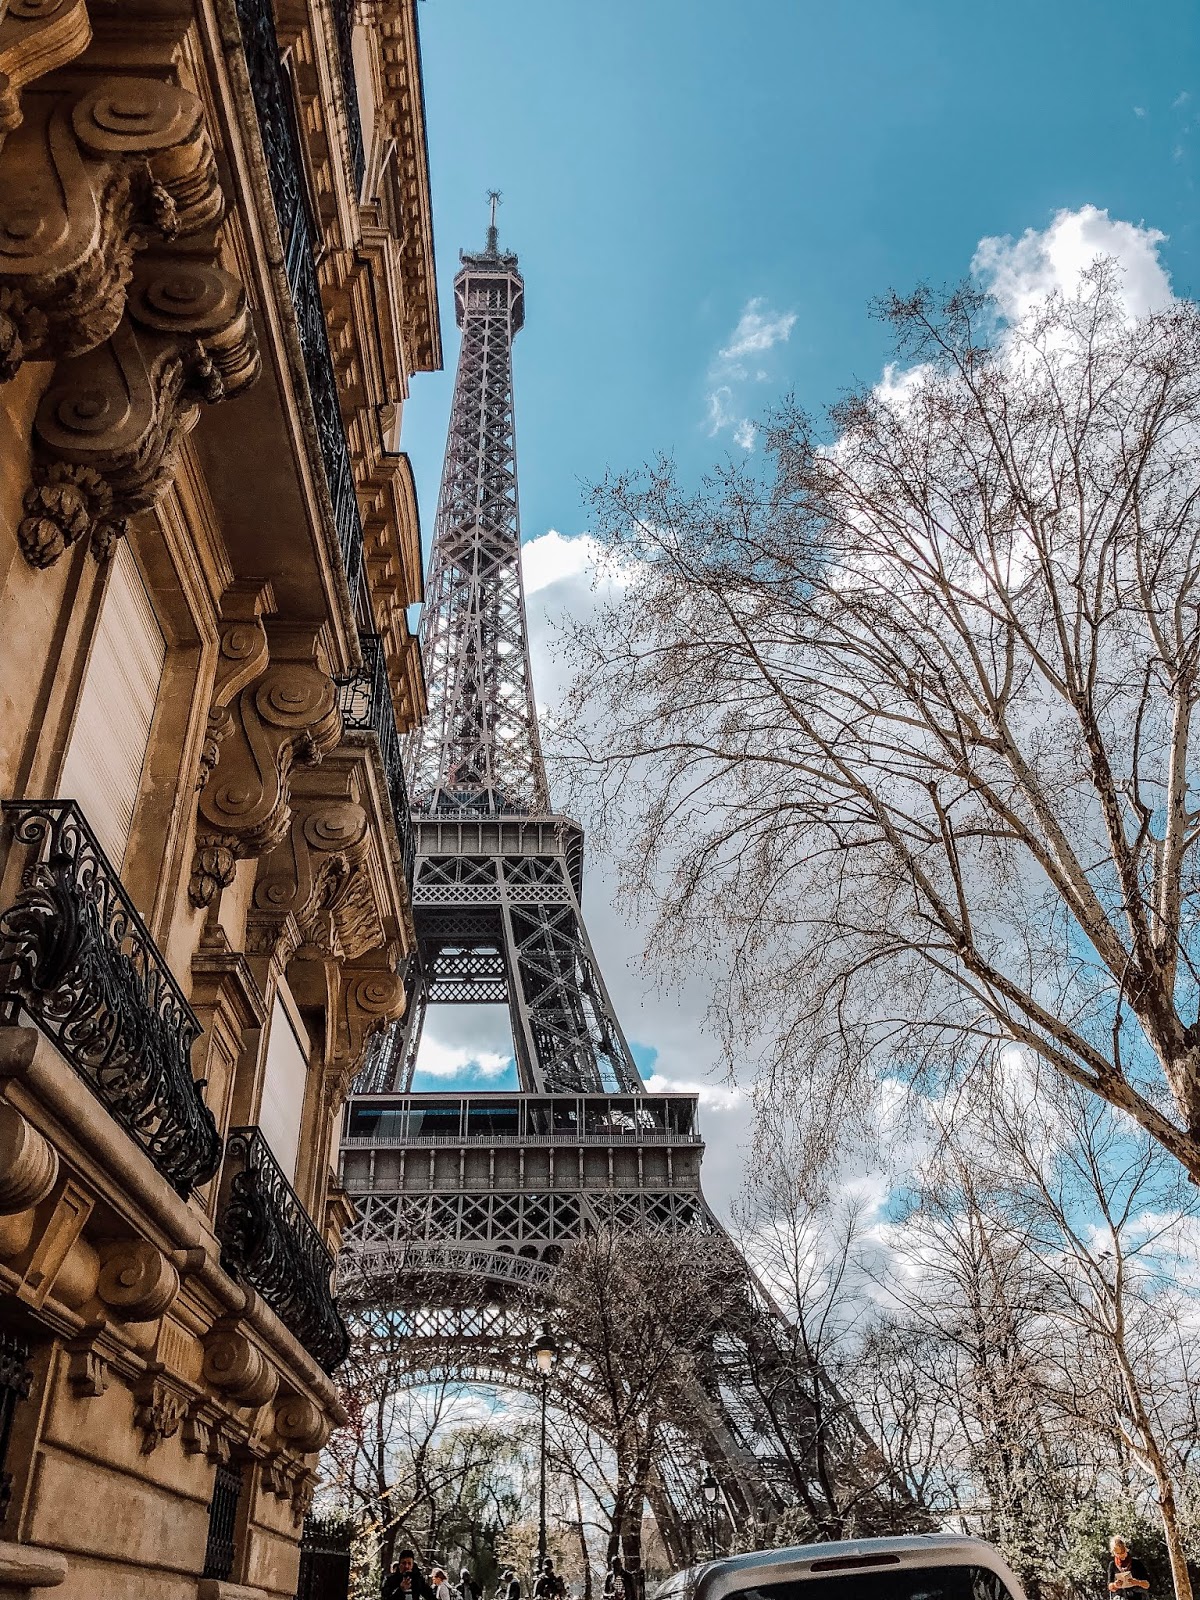 the eiffel tower in paris, france